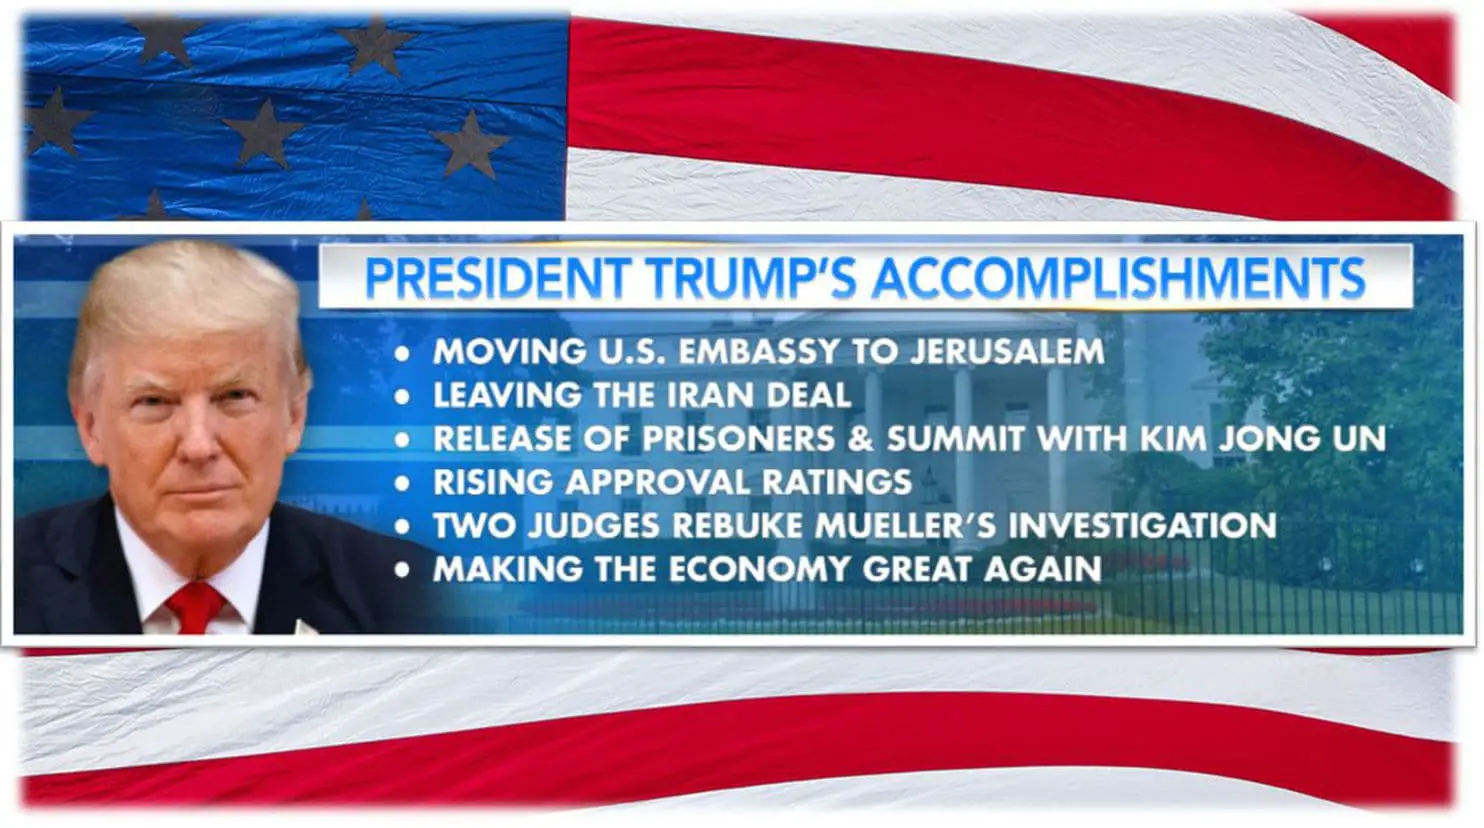 Lets take a look at the odd list of Trump accomplishments ...